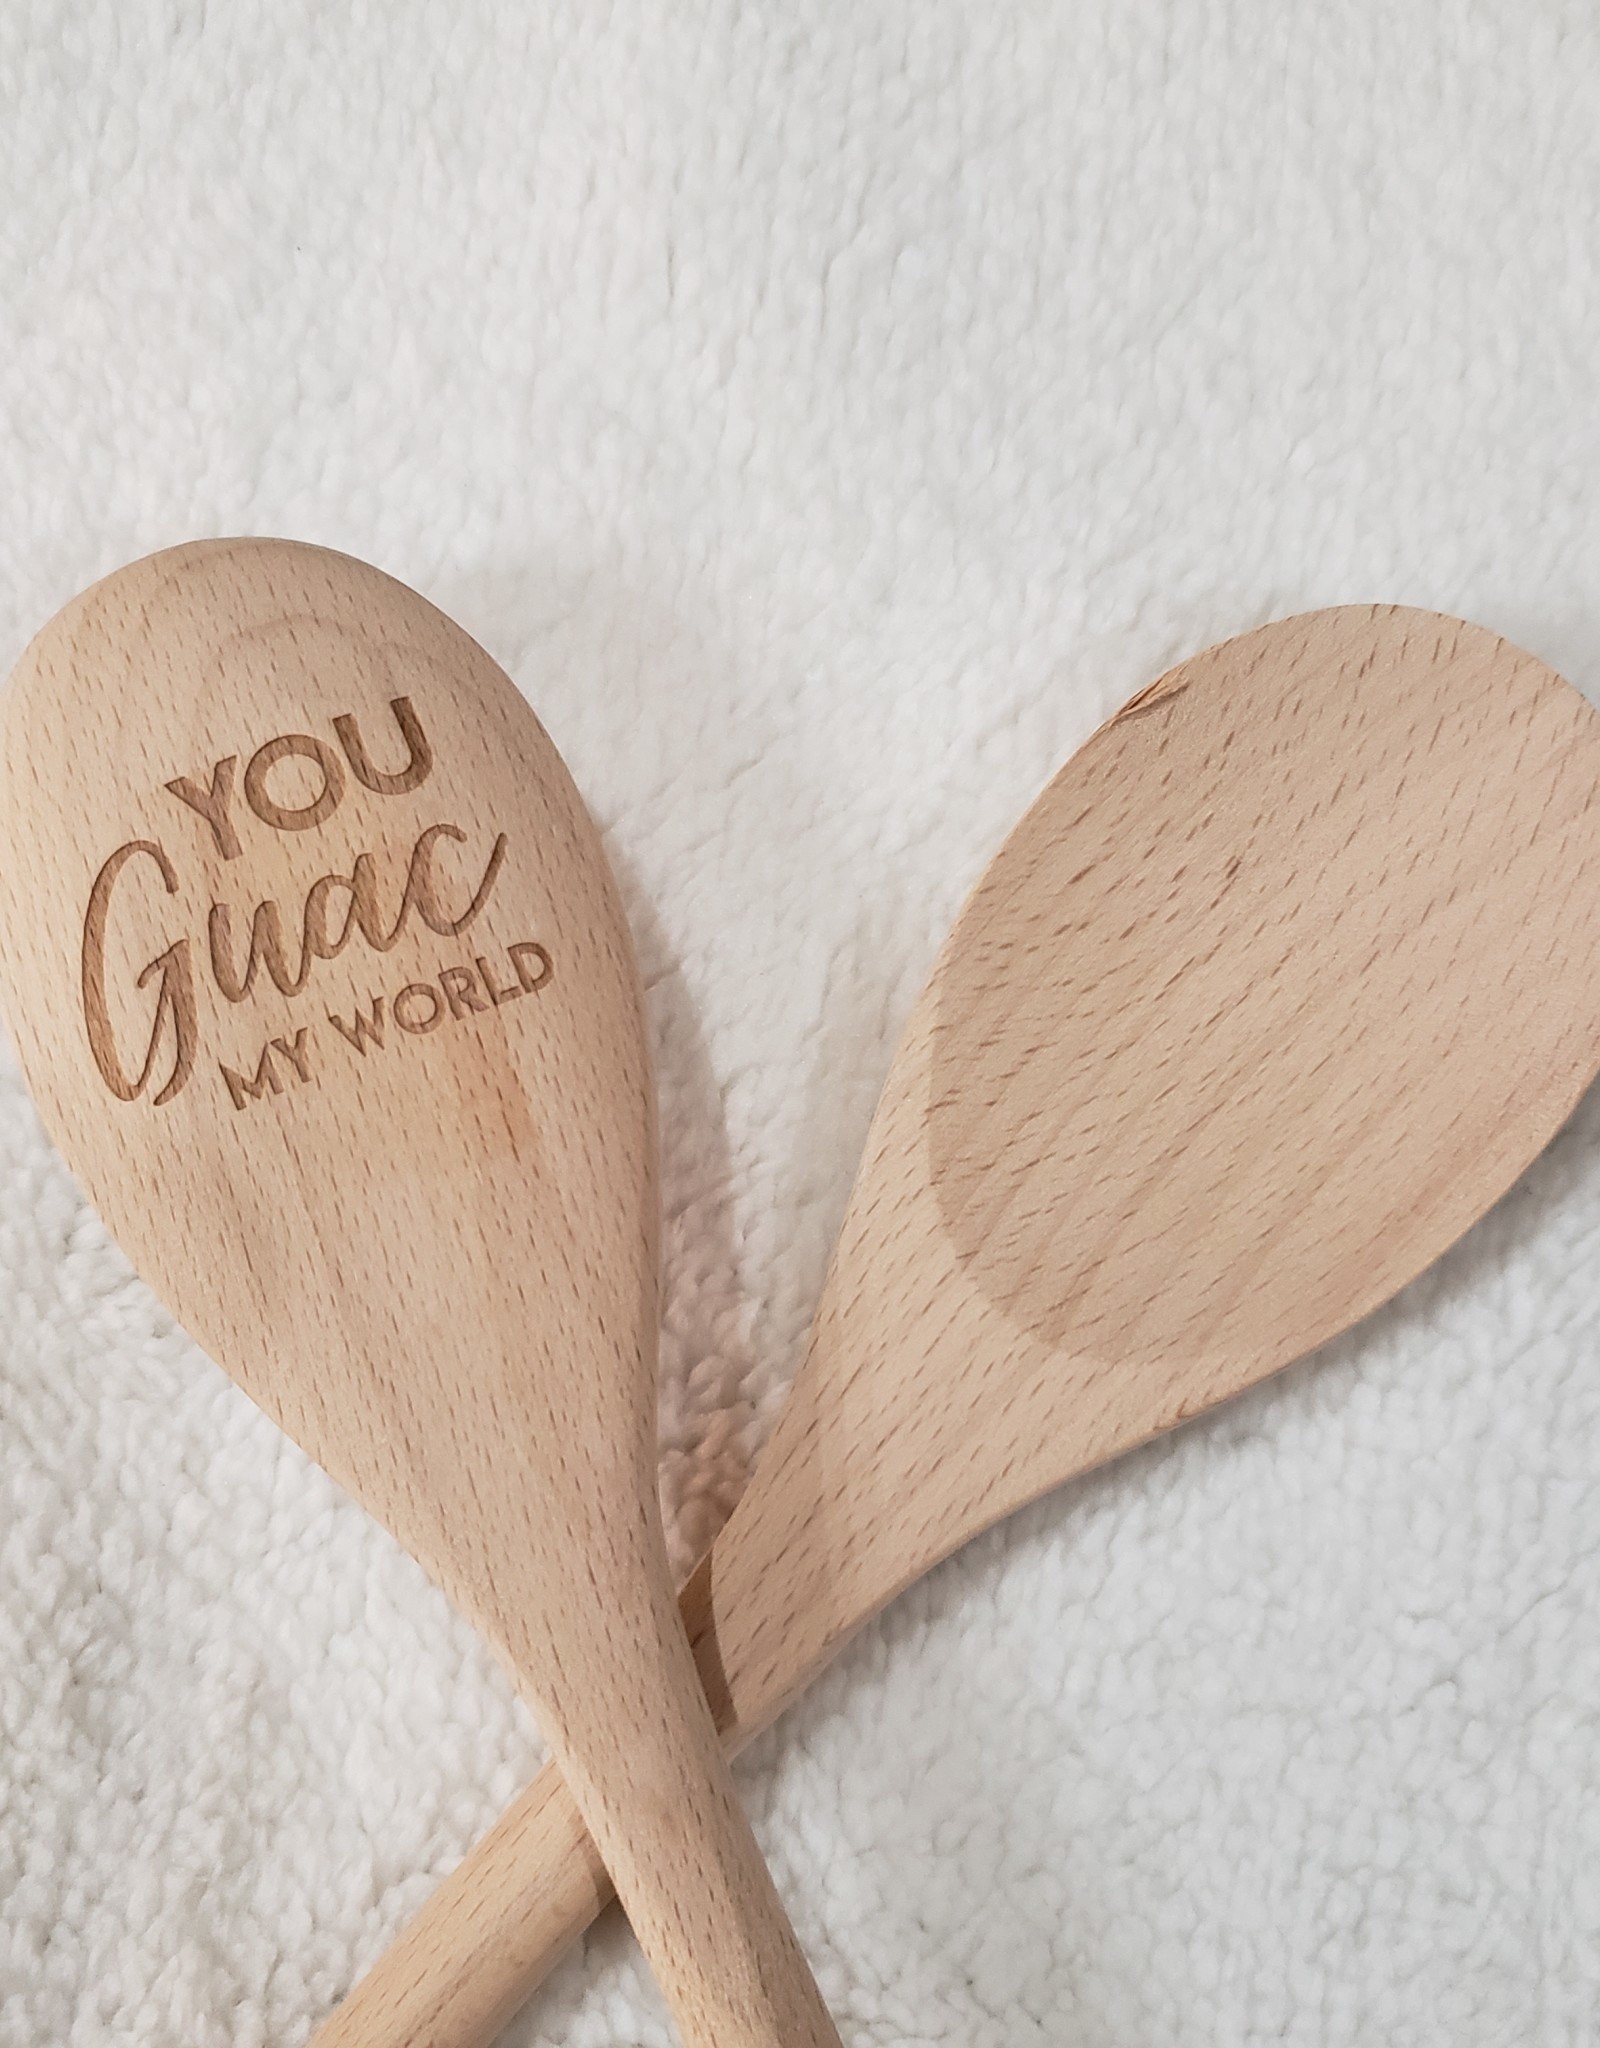 Wooden Spoon - You Guac My World